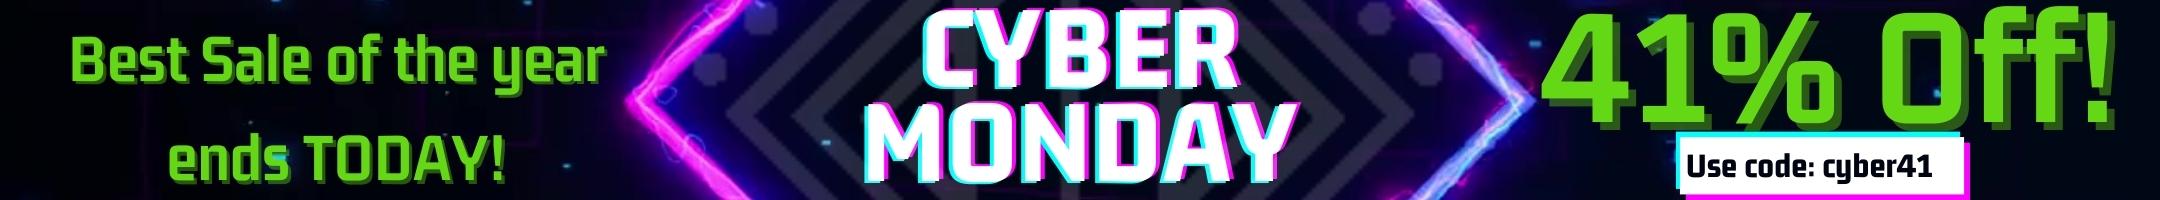 Cyber Monday Banner (2160 x 200 px)